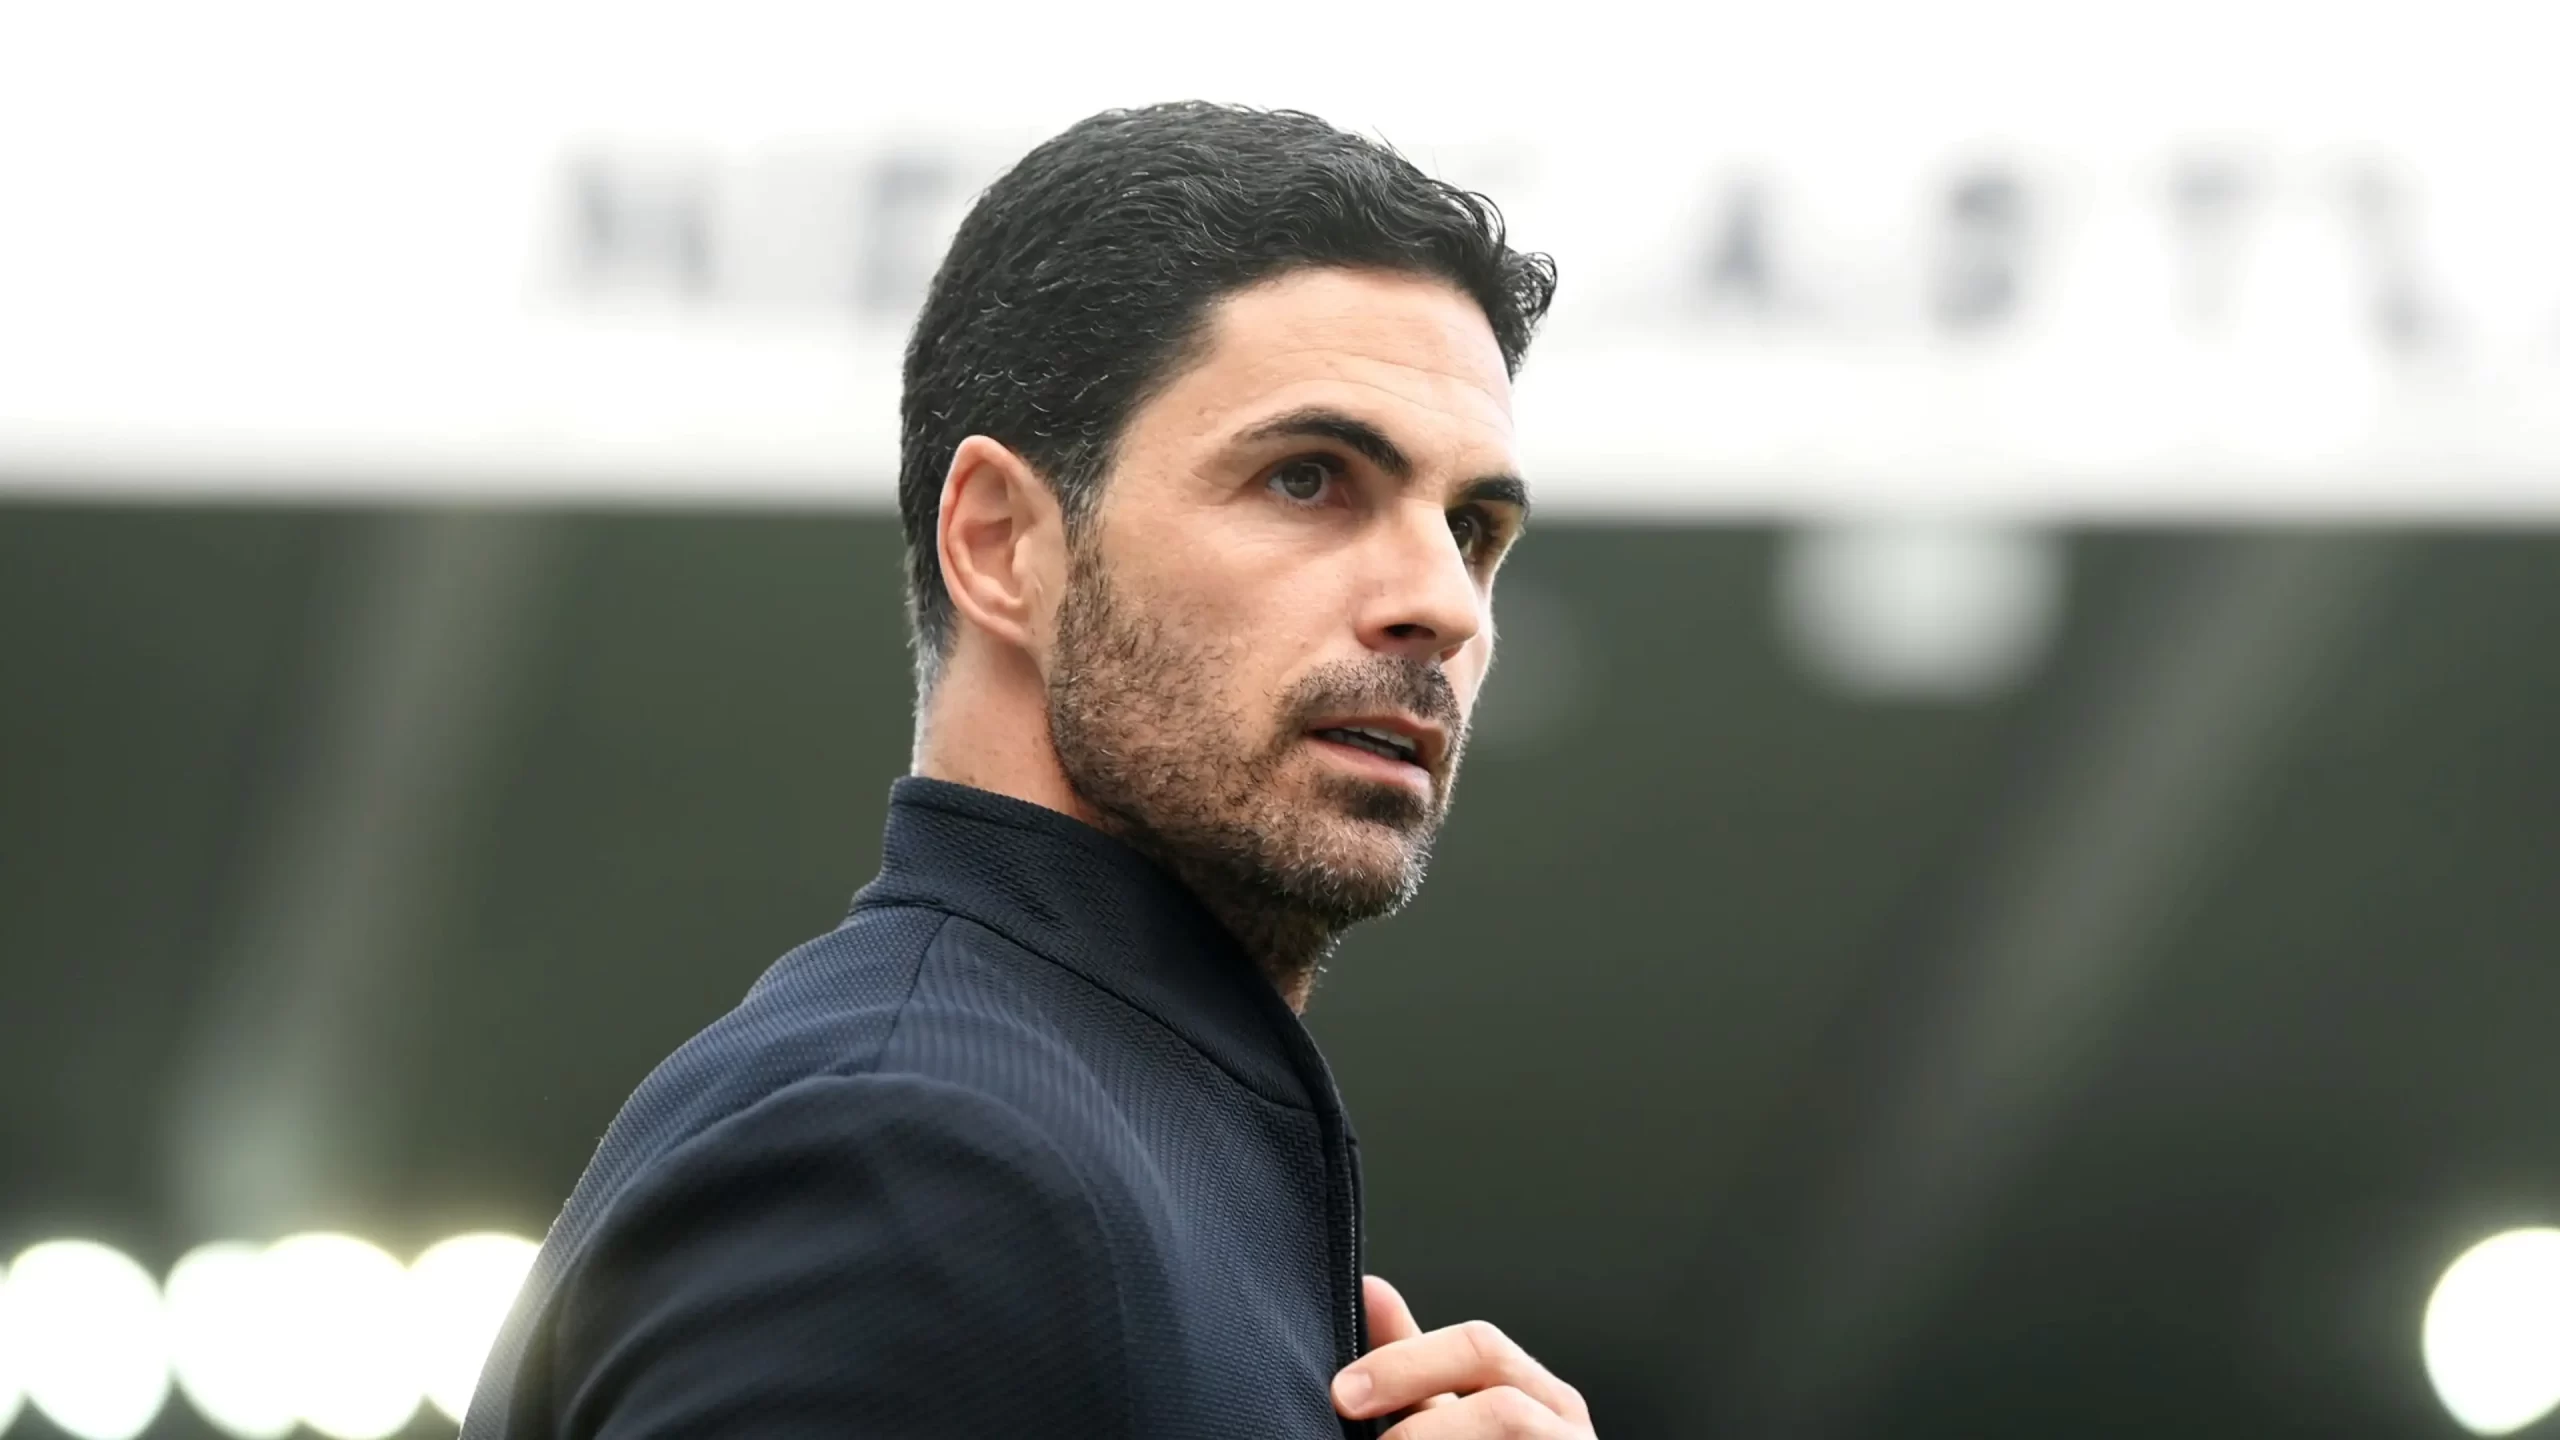 Full List of Arsenal players Mikel Arteta wants to sell